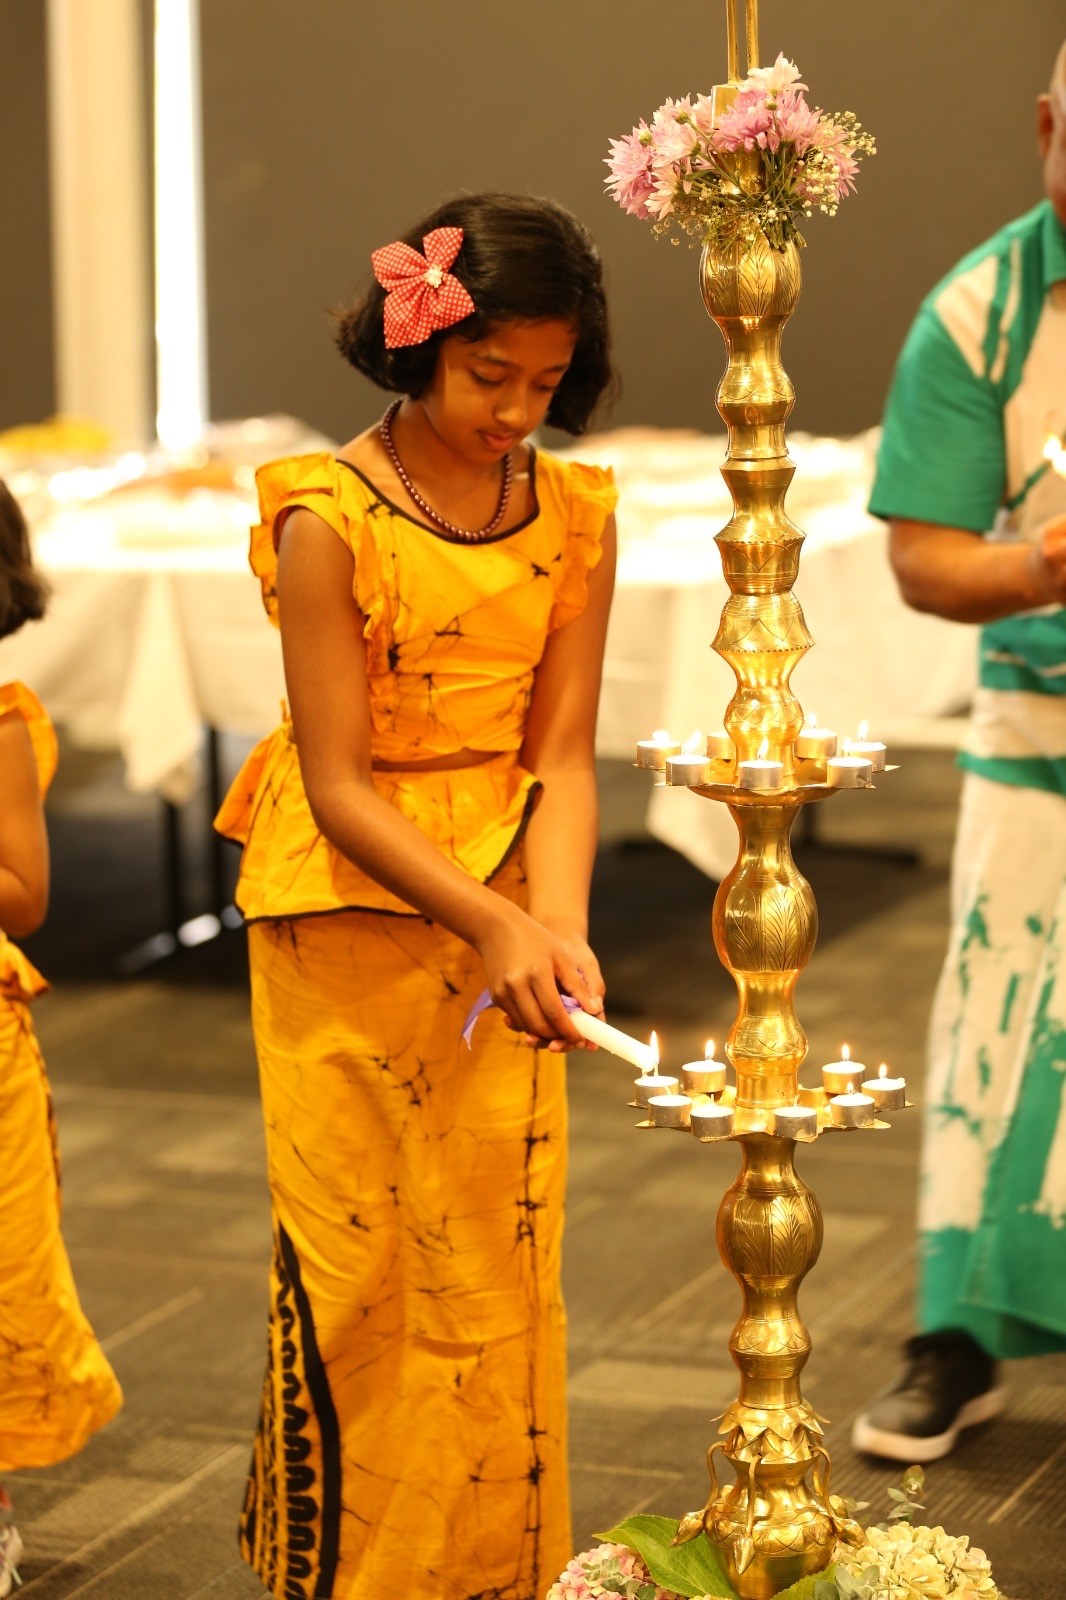 A girl in a yellow dress lights a candle as part of traditional celebrations